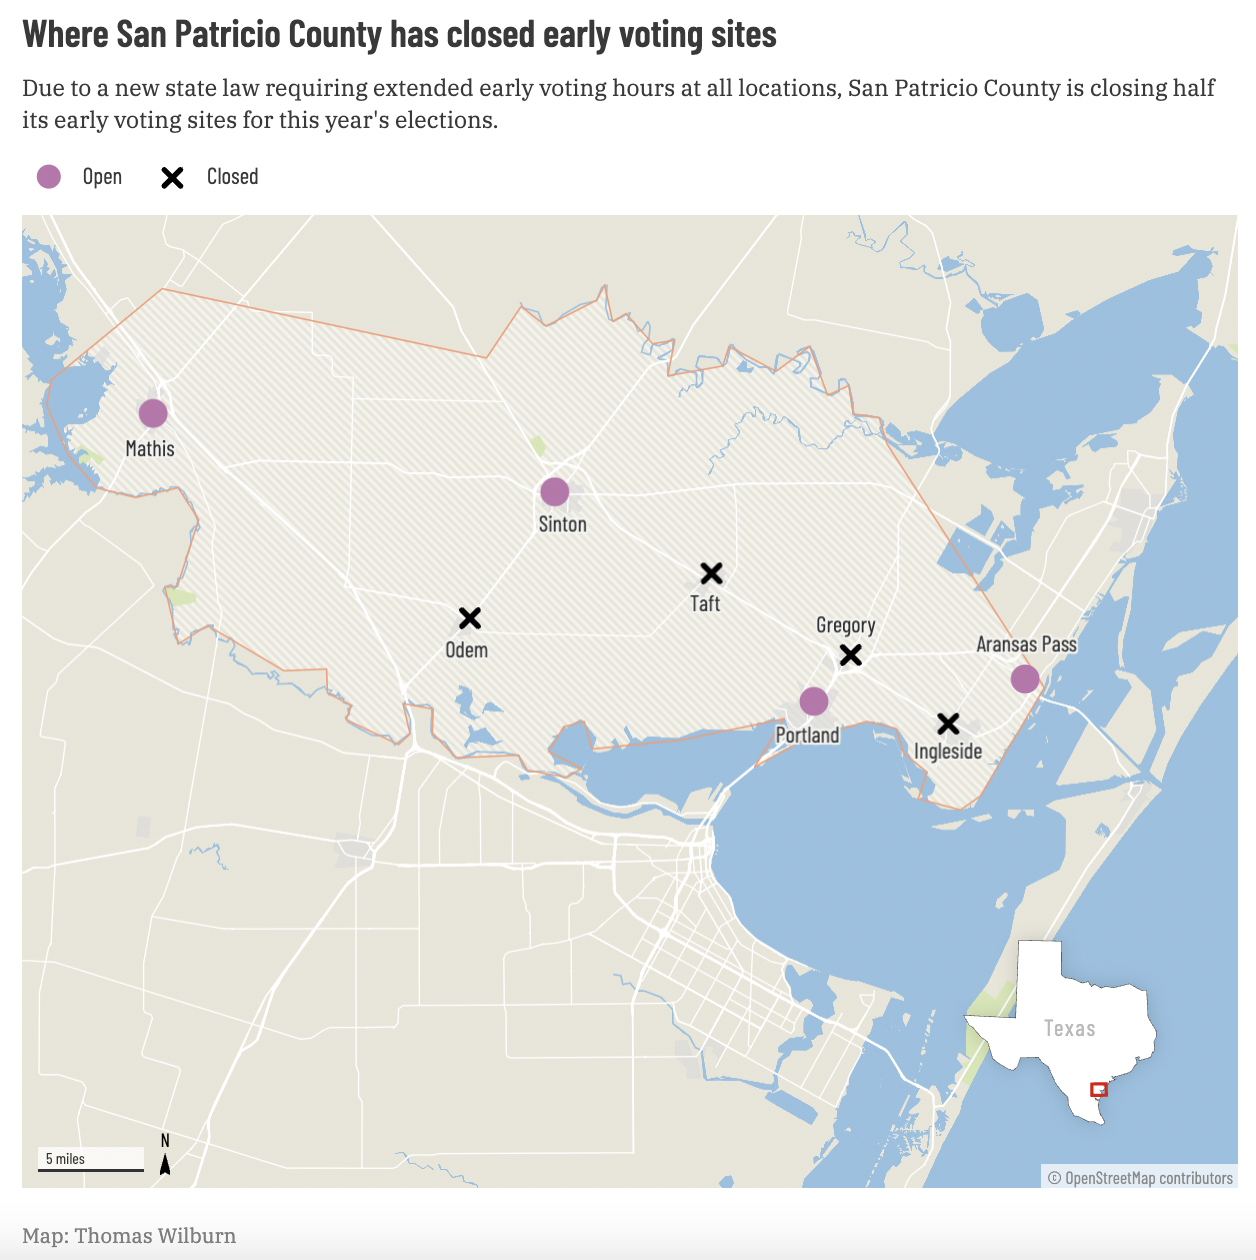 map showing where San Patricio County has closed early voting sites